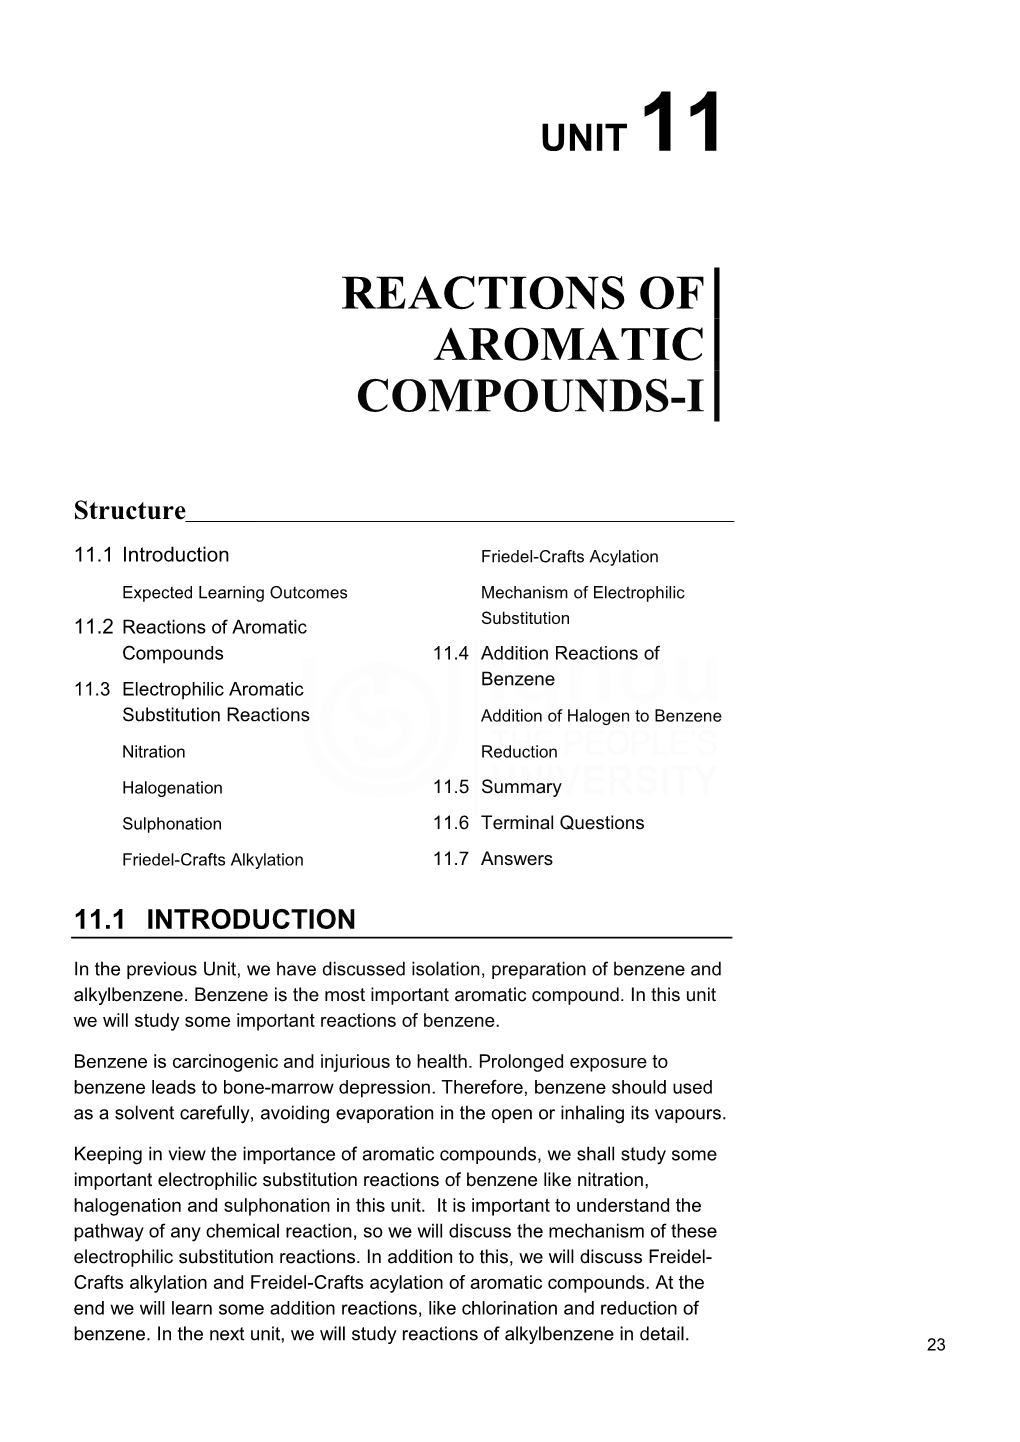 Reactions of Aromatic Compounds-I